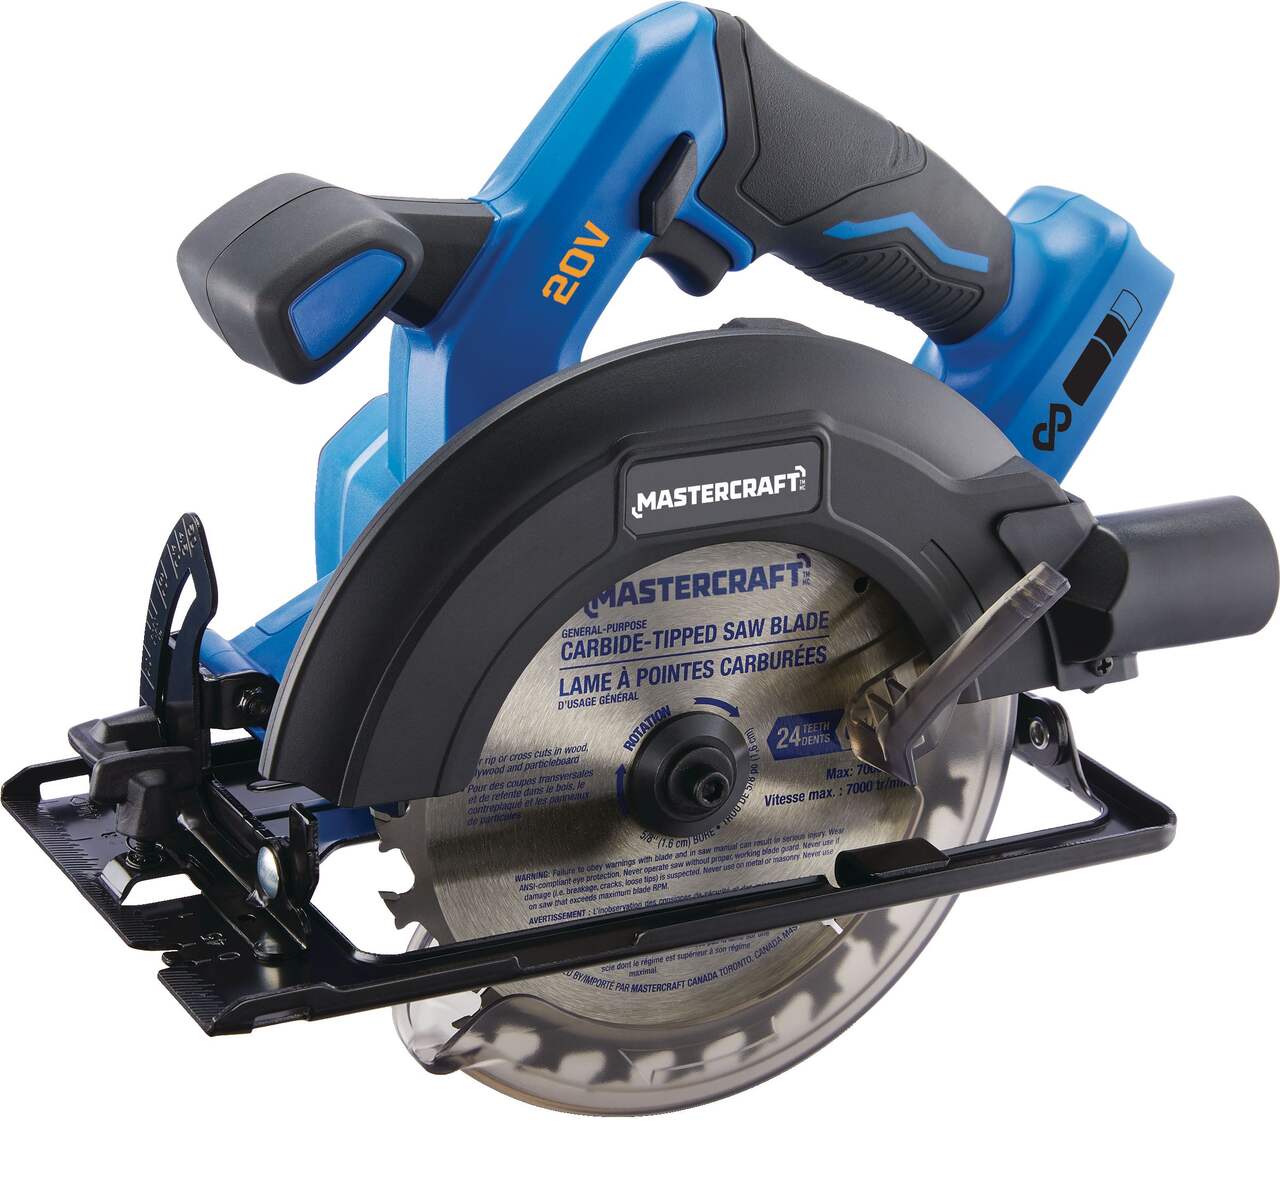 https://media-www.canadiantire.ca/product/fixing/tools/portable-power-tools/0548285/mastercraft-20v-max-6-1-2-circular-saw-bare-tool--5b6db106-11e0-4208-96e5-5cd9f83f936a-jpgrendition.jpg?imdensity=1&imwidth=640&impolicy=mZoom